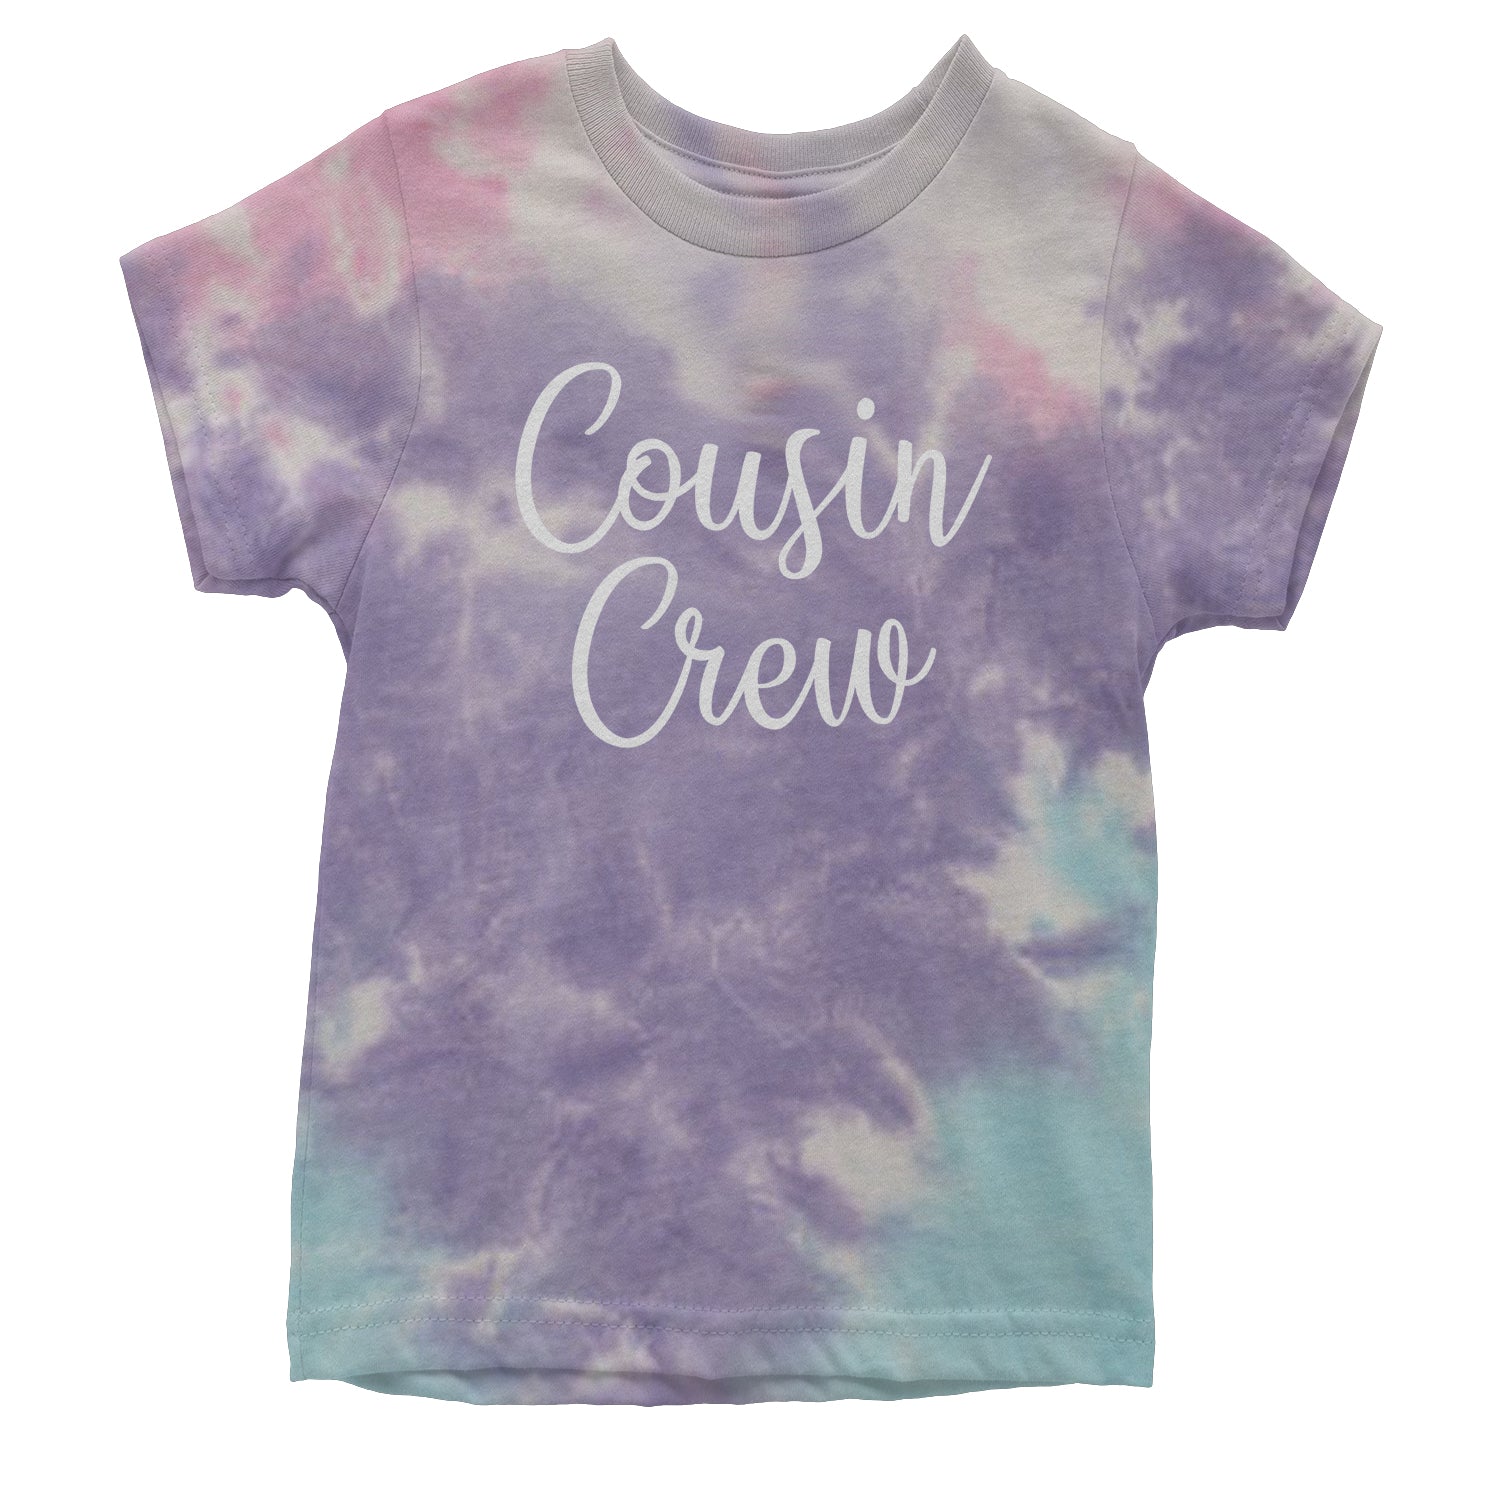 Cousin Crew Fun Family Outfit Youth T-shirt barbecue, bbq, cook, family, out, reunion by Expression Tees